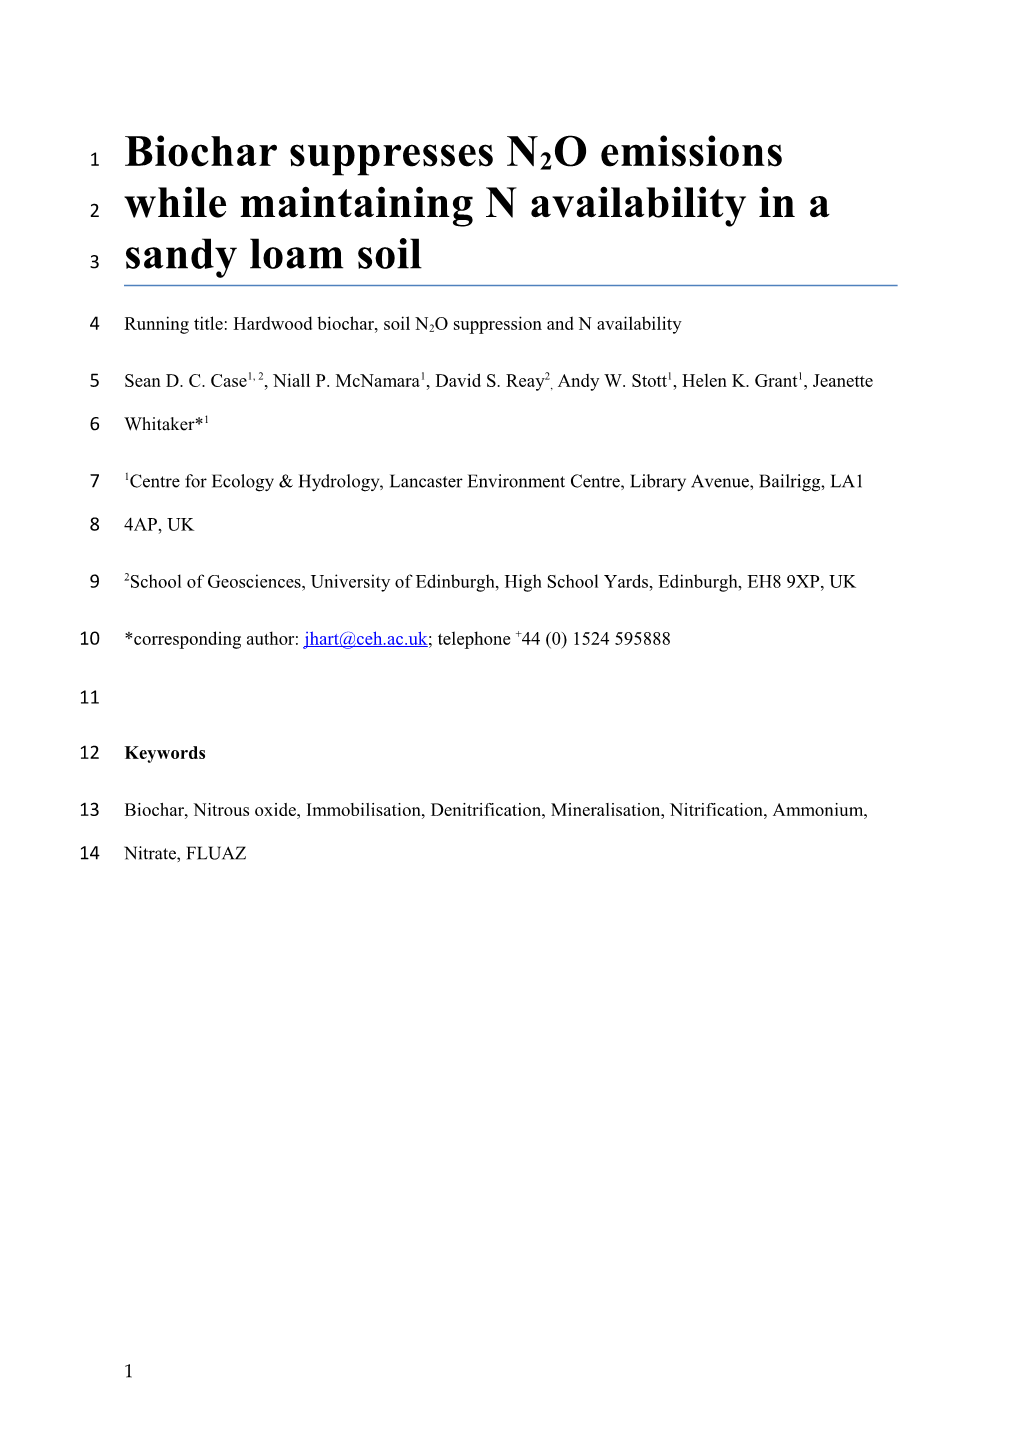 Biochar Suppresses N2O Emissions While Maintaining N Availability in a Sandy Loam Soil